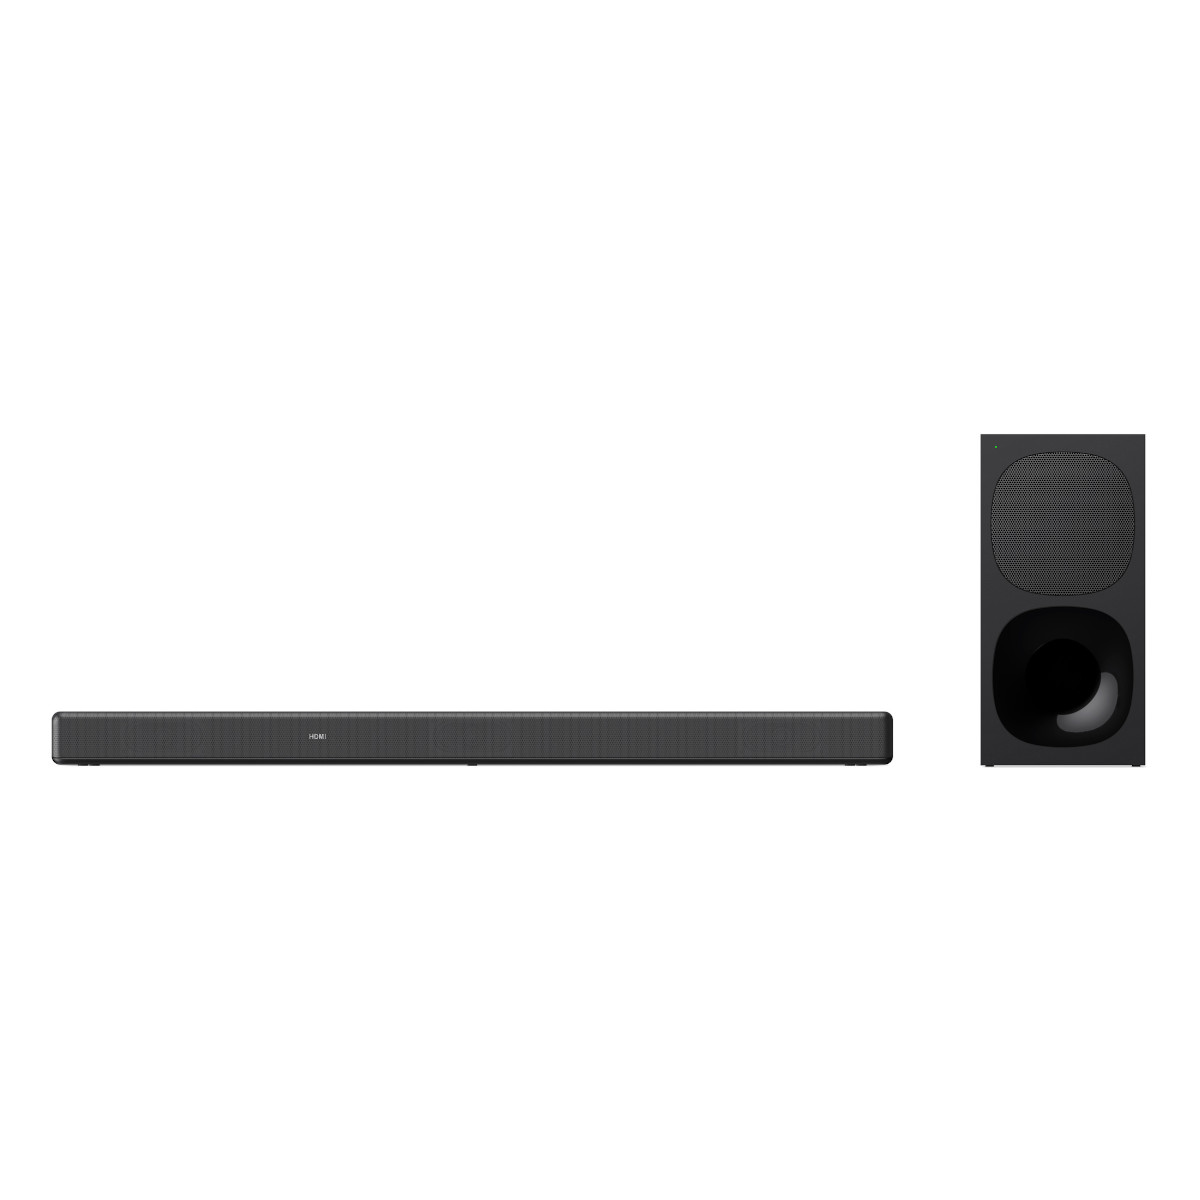 Sony HT-G700: 3.1CH Dolby Atmos/DTS:X Soundbar with Bluetooth Technology - image 1 of 13